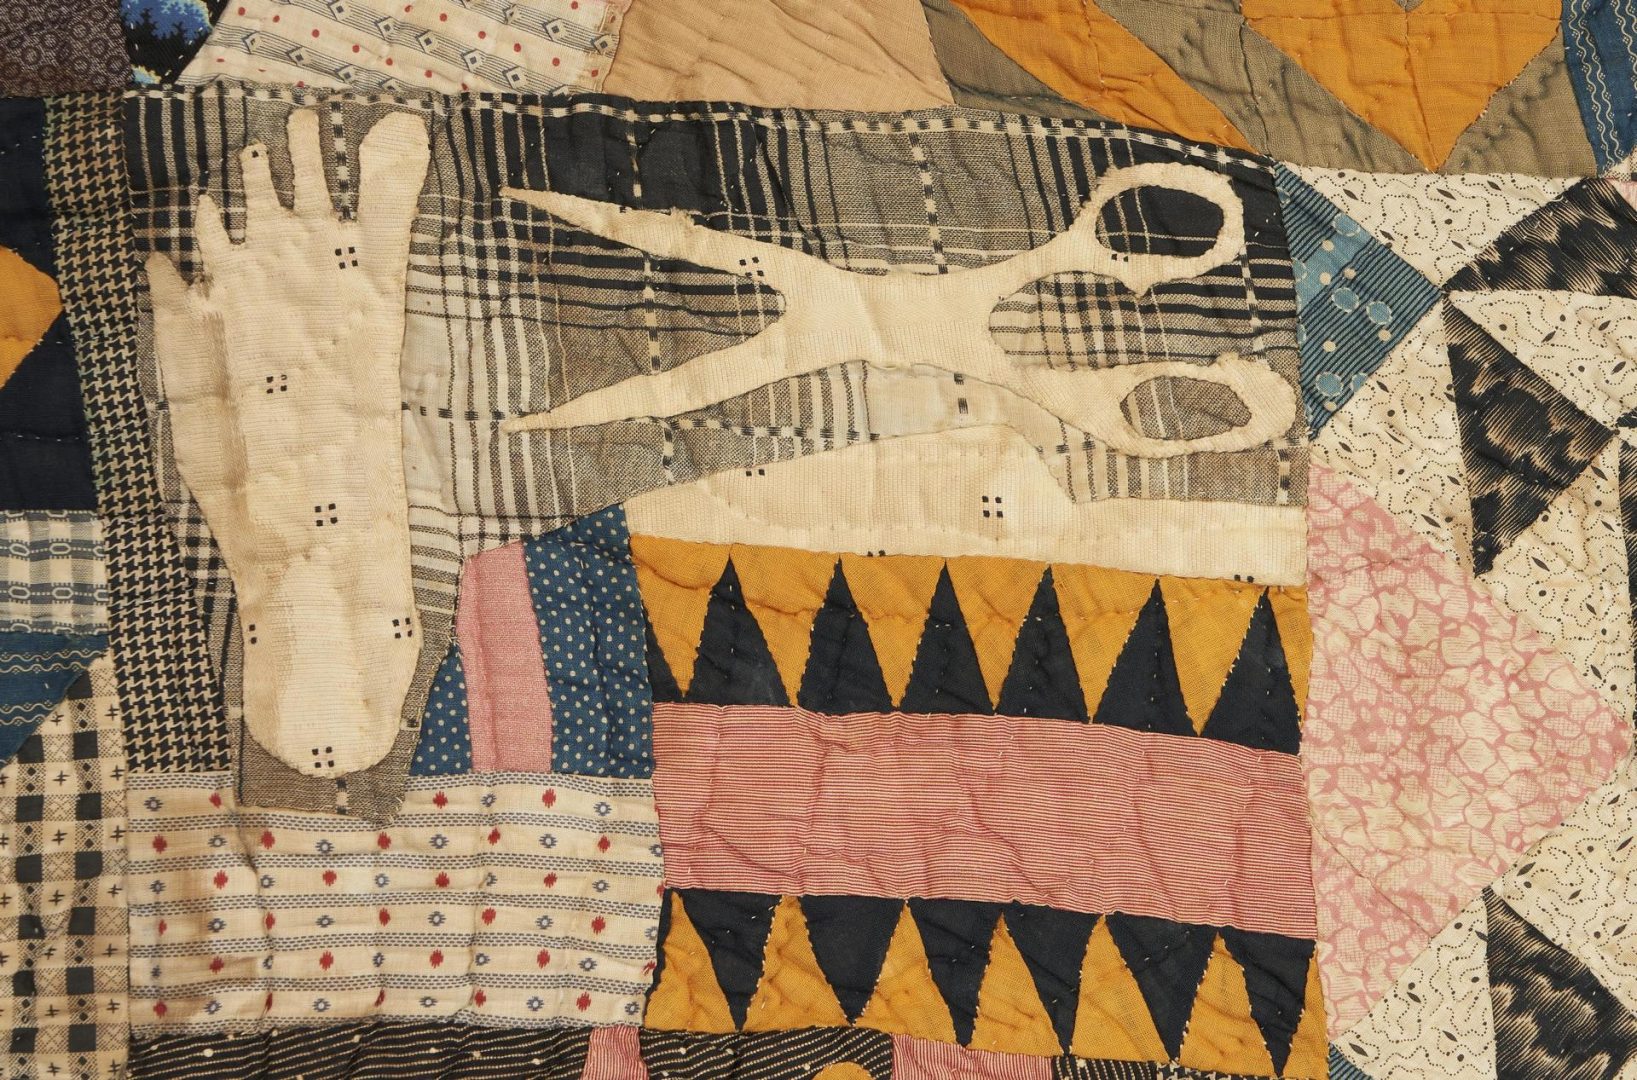 Lot 203: Exhibited African-American Quilt by Josie Covington, TN, Late 19th C.